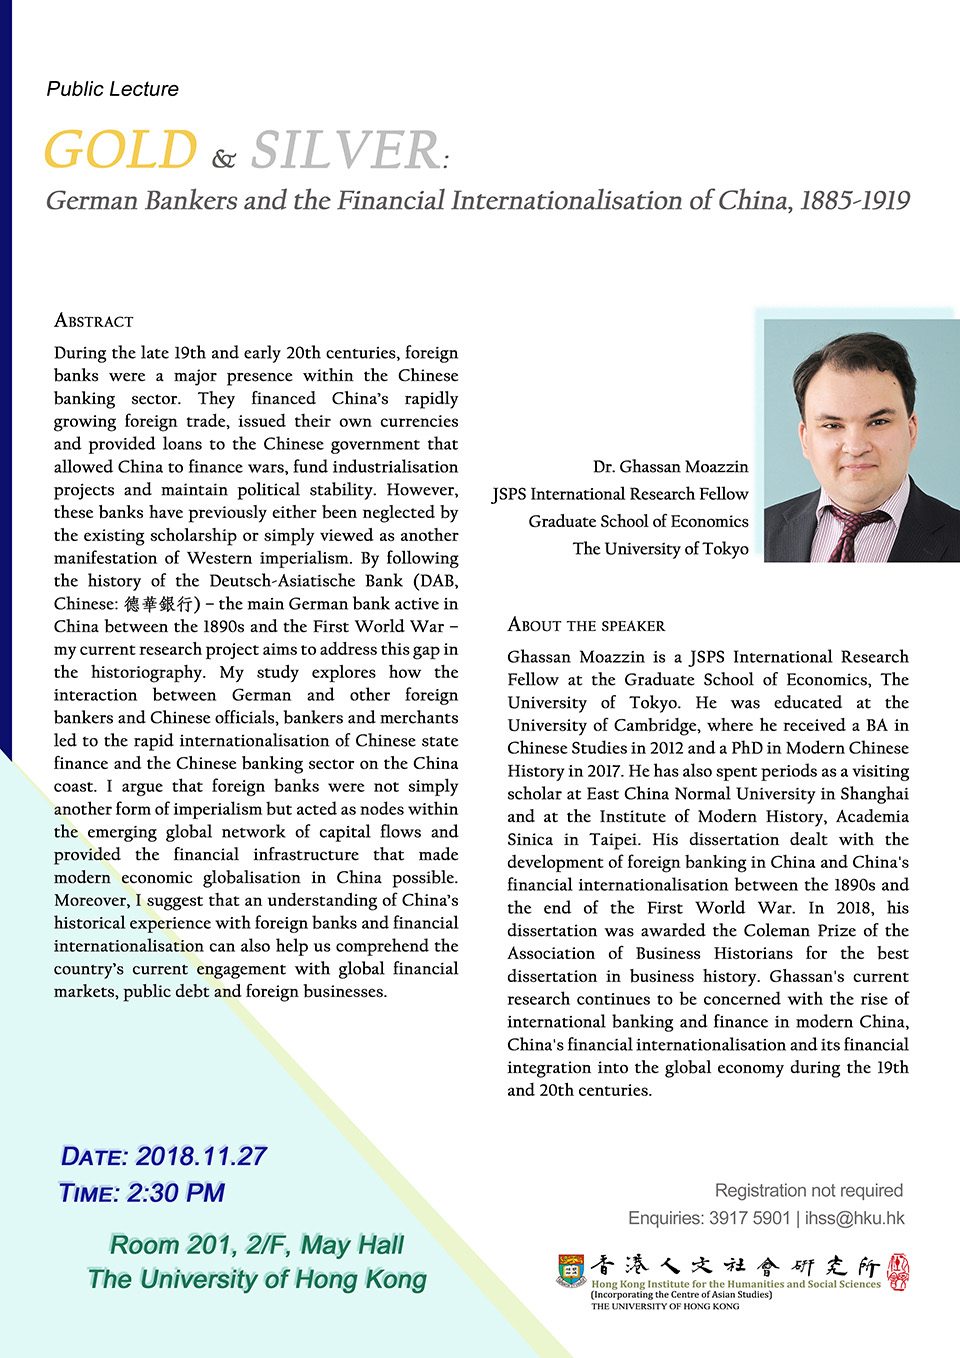 Public Lecture on “Gold and Silver: German Bankers and the Financial Internationalisation of China, 1885-1919” by Dr. Ghassan Moazzin (November 27, 2018)